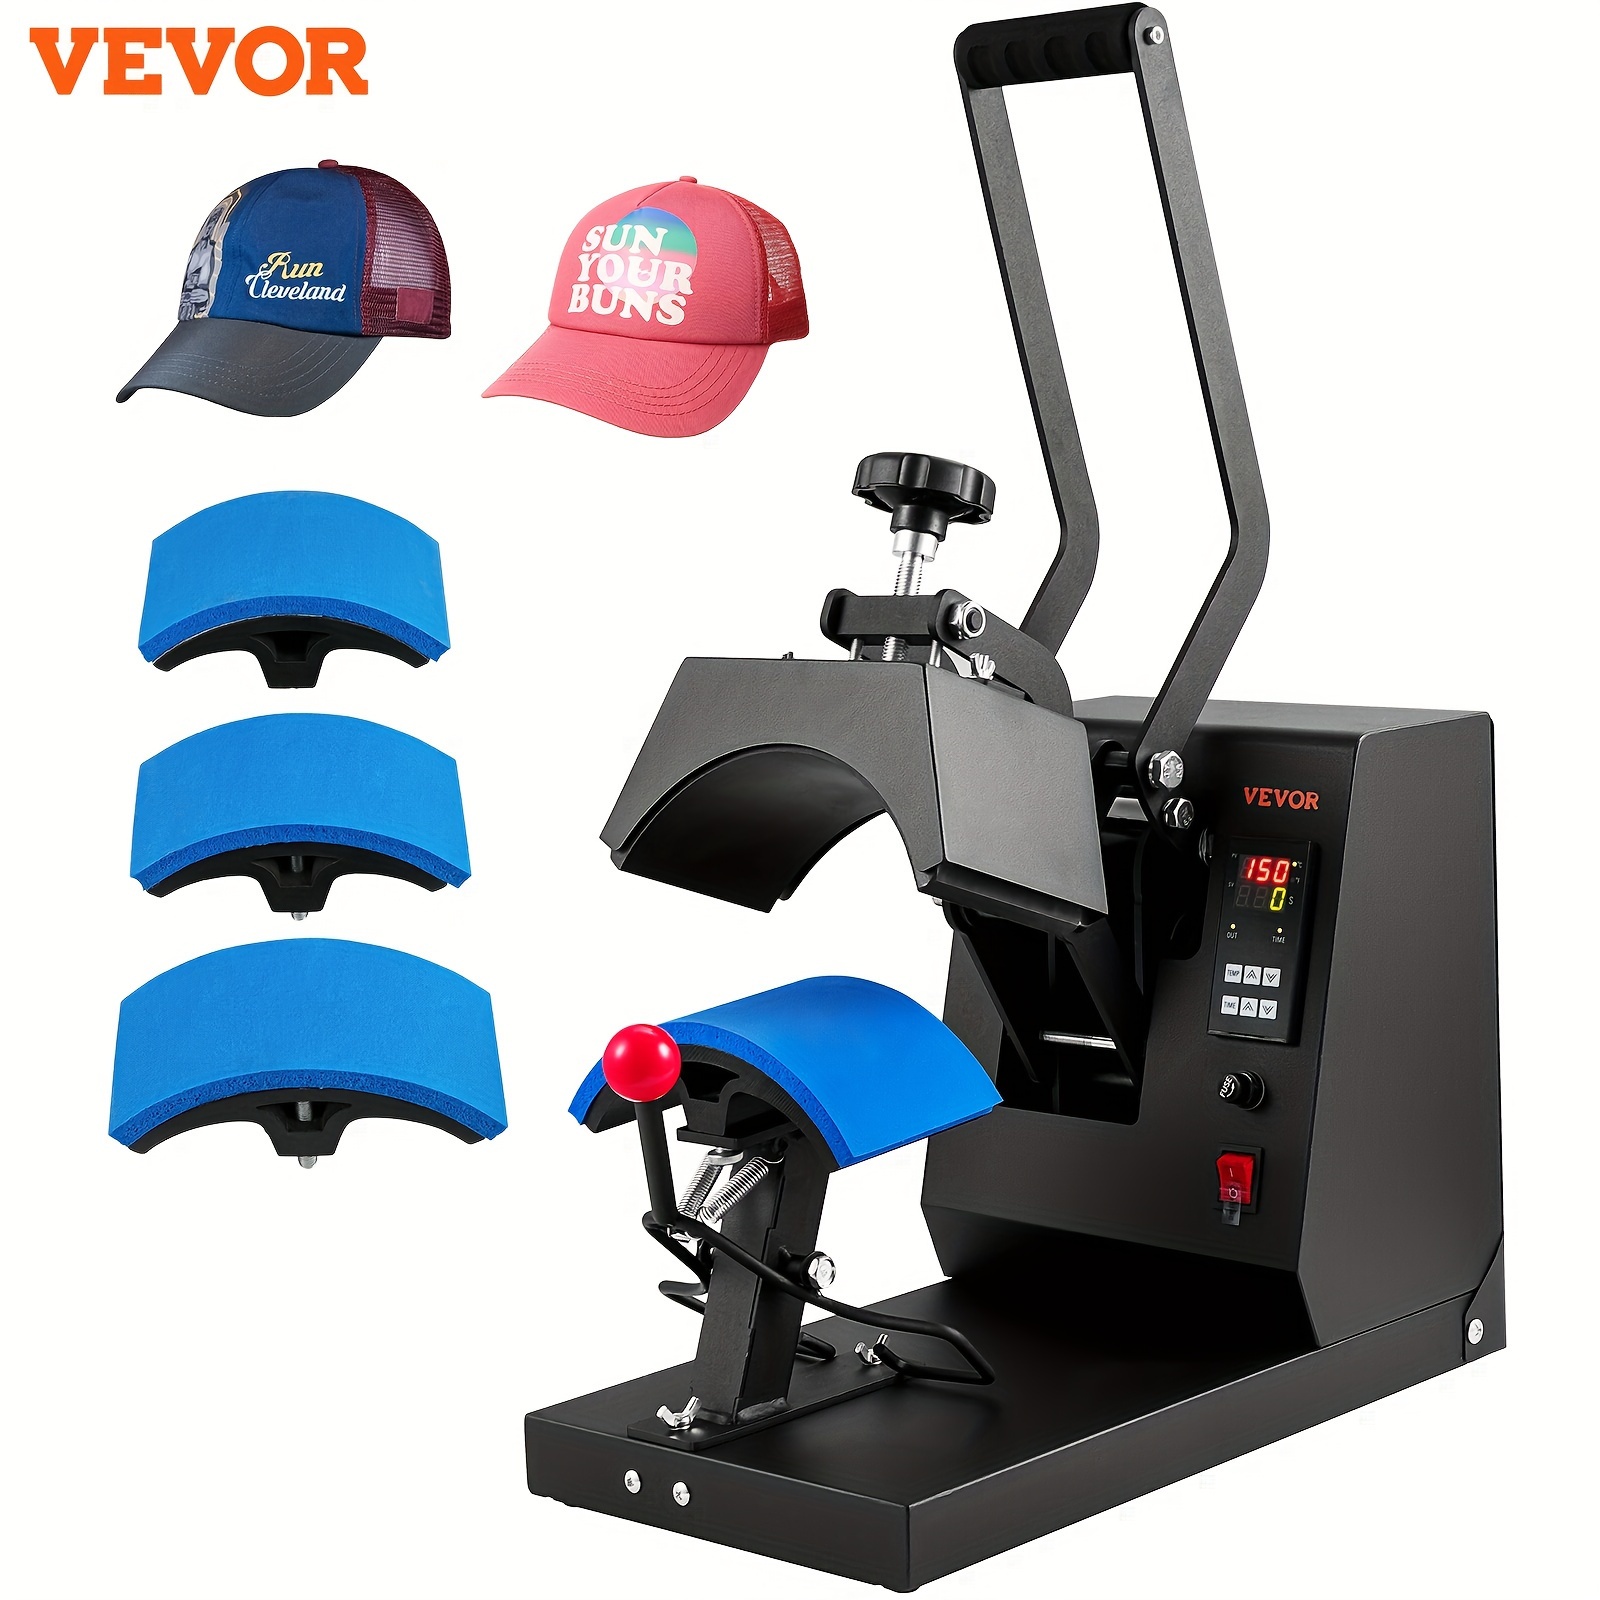 

Vevor Hat Heat Press, 4-in-1 Cap Heat Press Machine, 6x3inches Clamshell Sublimation Transfer, Lcd Digital Timer Temperature Control With 4pcs Curved Heating Elements (6x3/6.7x2.7/6.7x2.7/8.1x3.5)